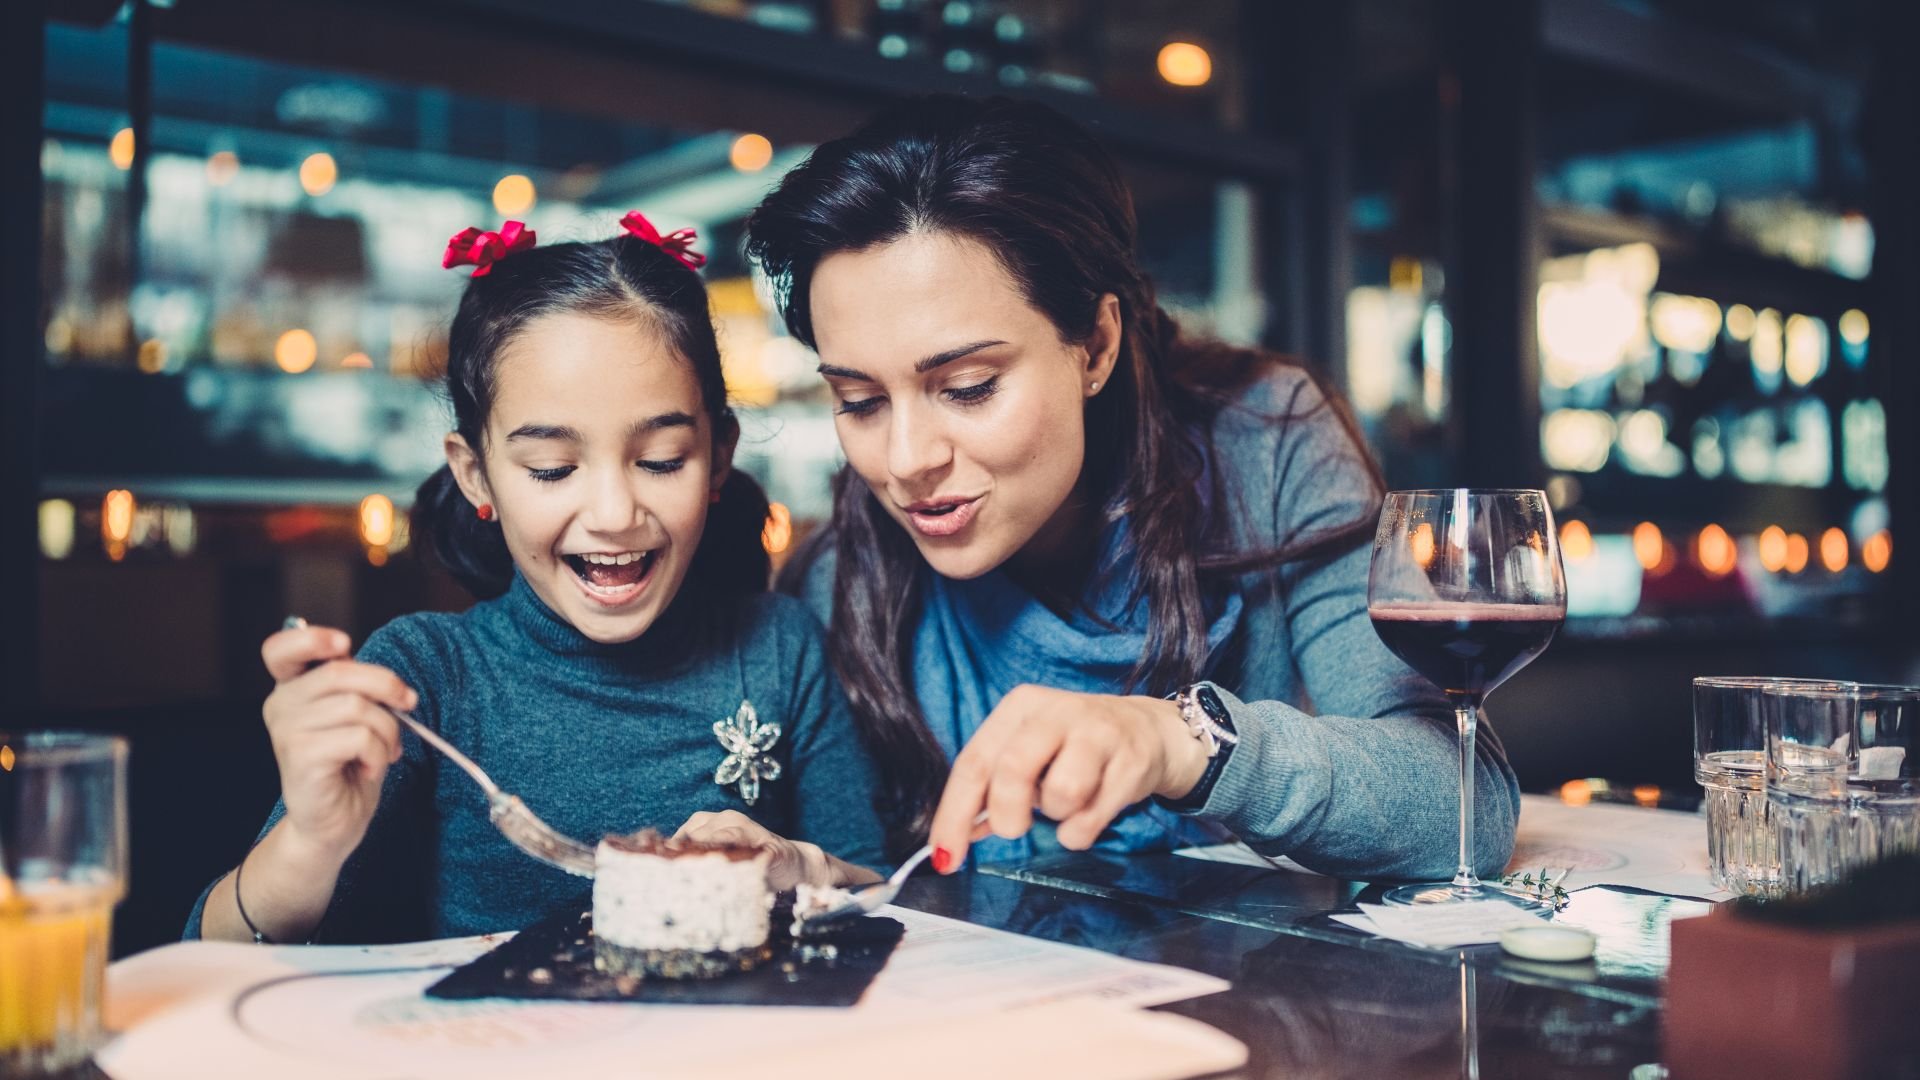 Mother and daughter eating a dessert in restaurant